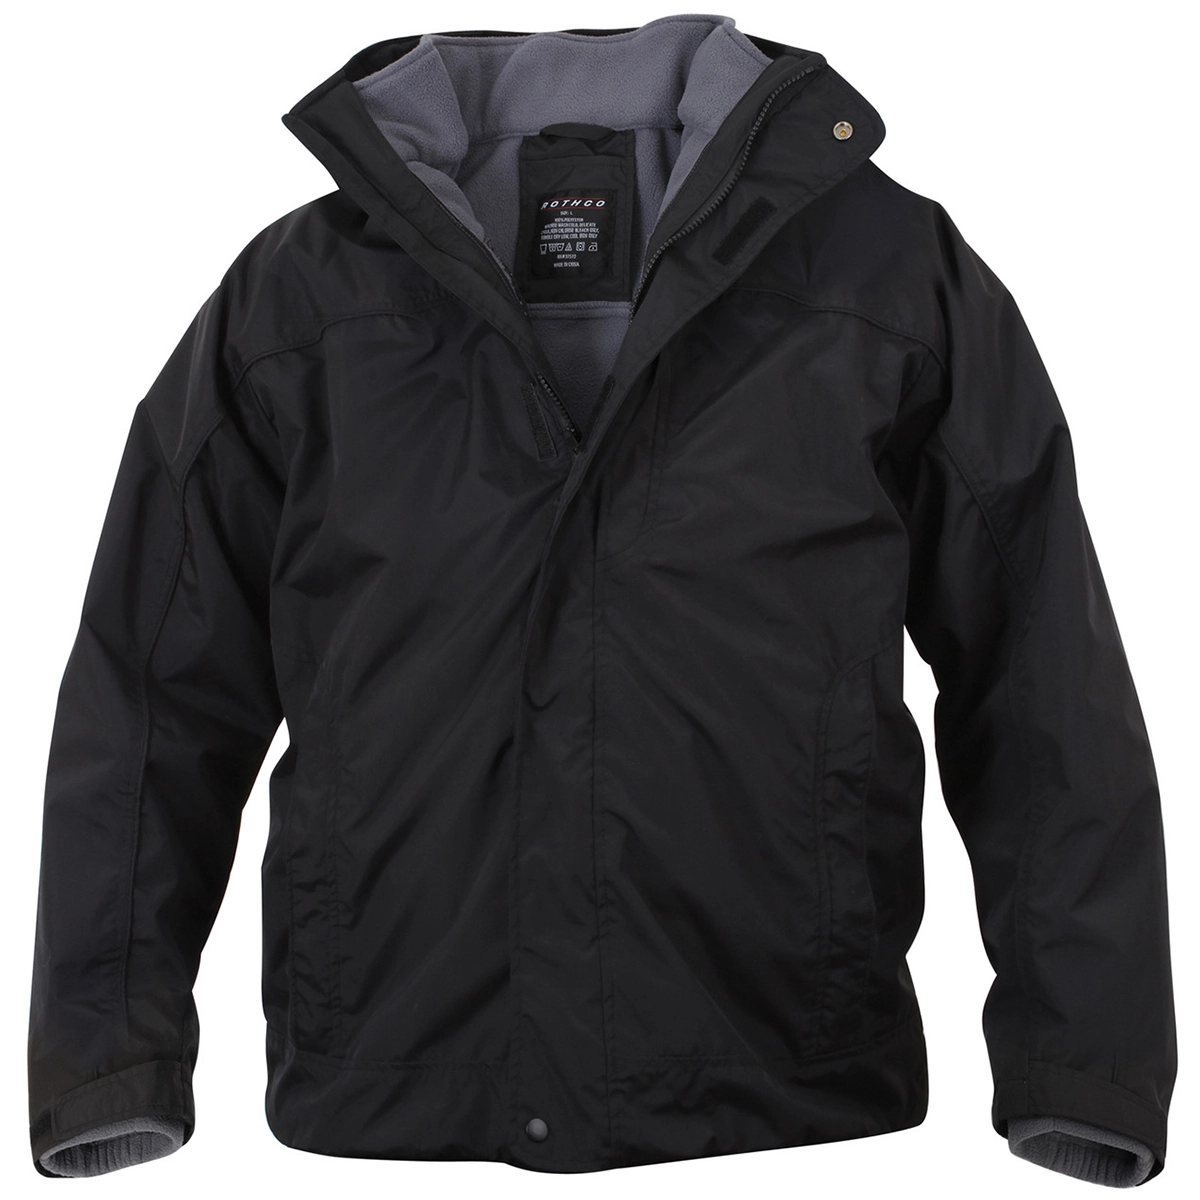 Rothco All Weather, 3 in 1 Jacket, Black 